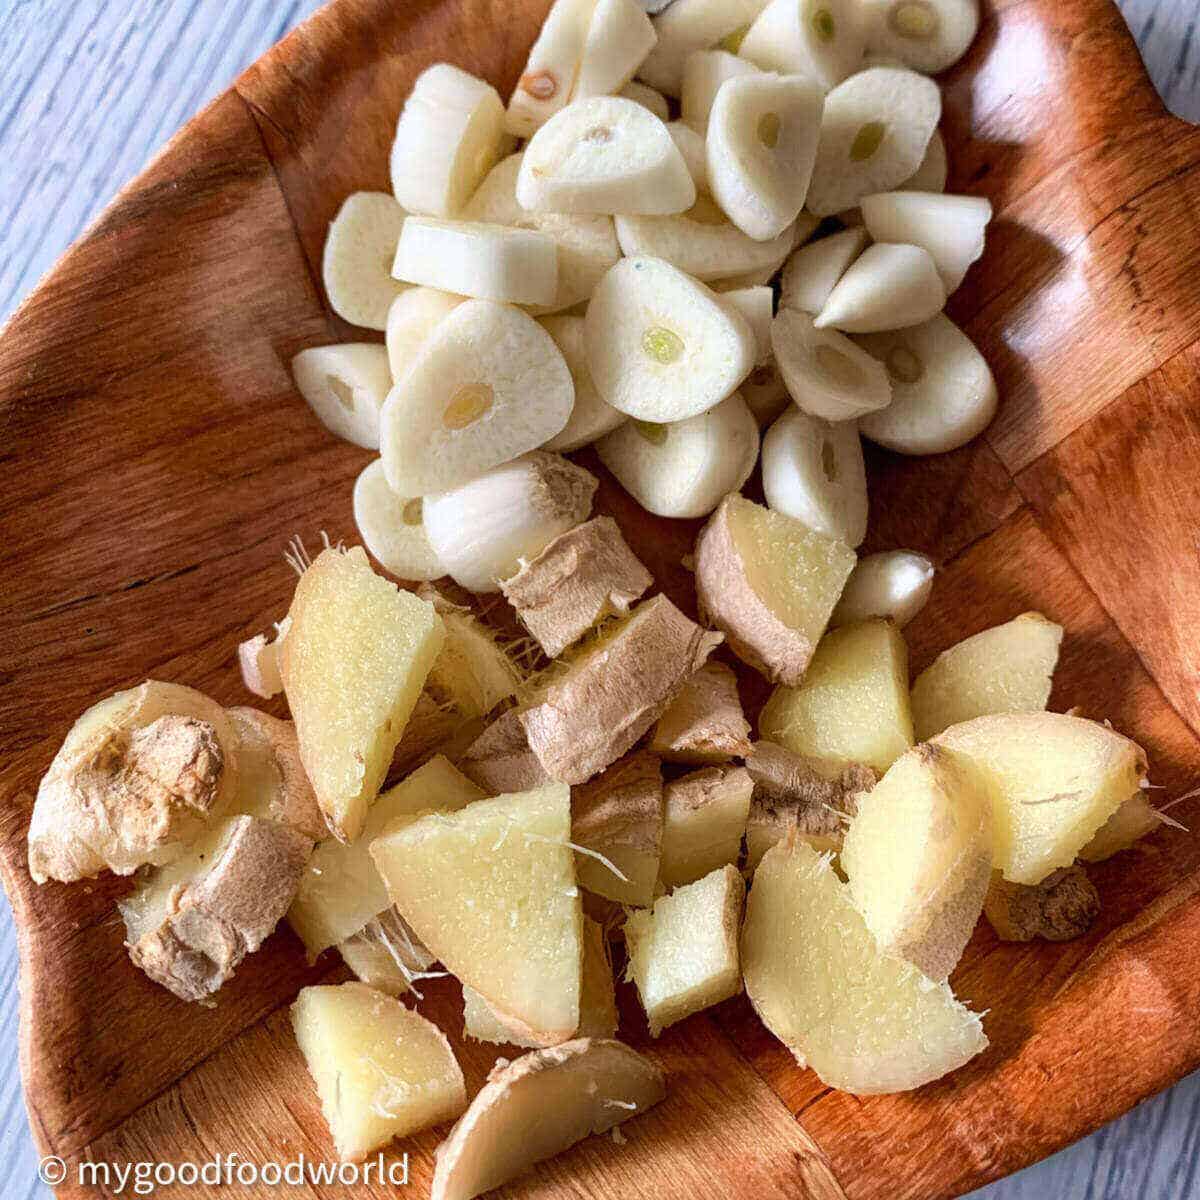 Chopped pieces of ginger and garlic placed in a wooden plate. 